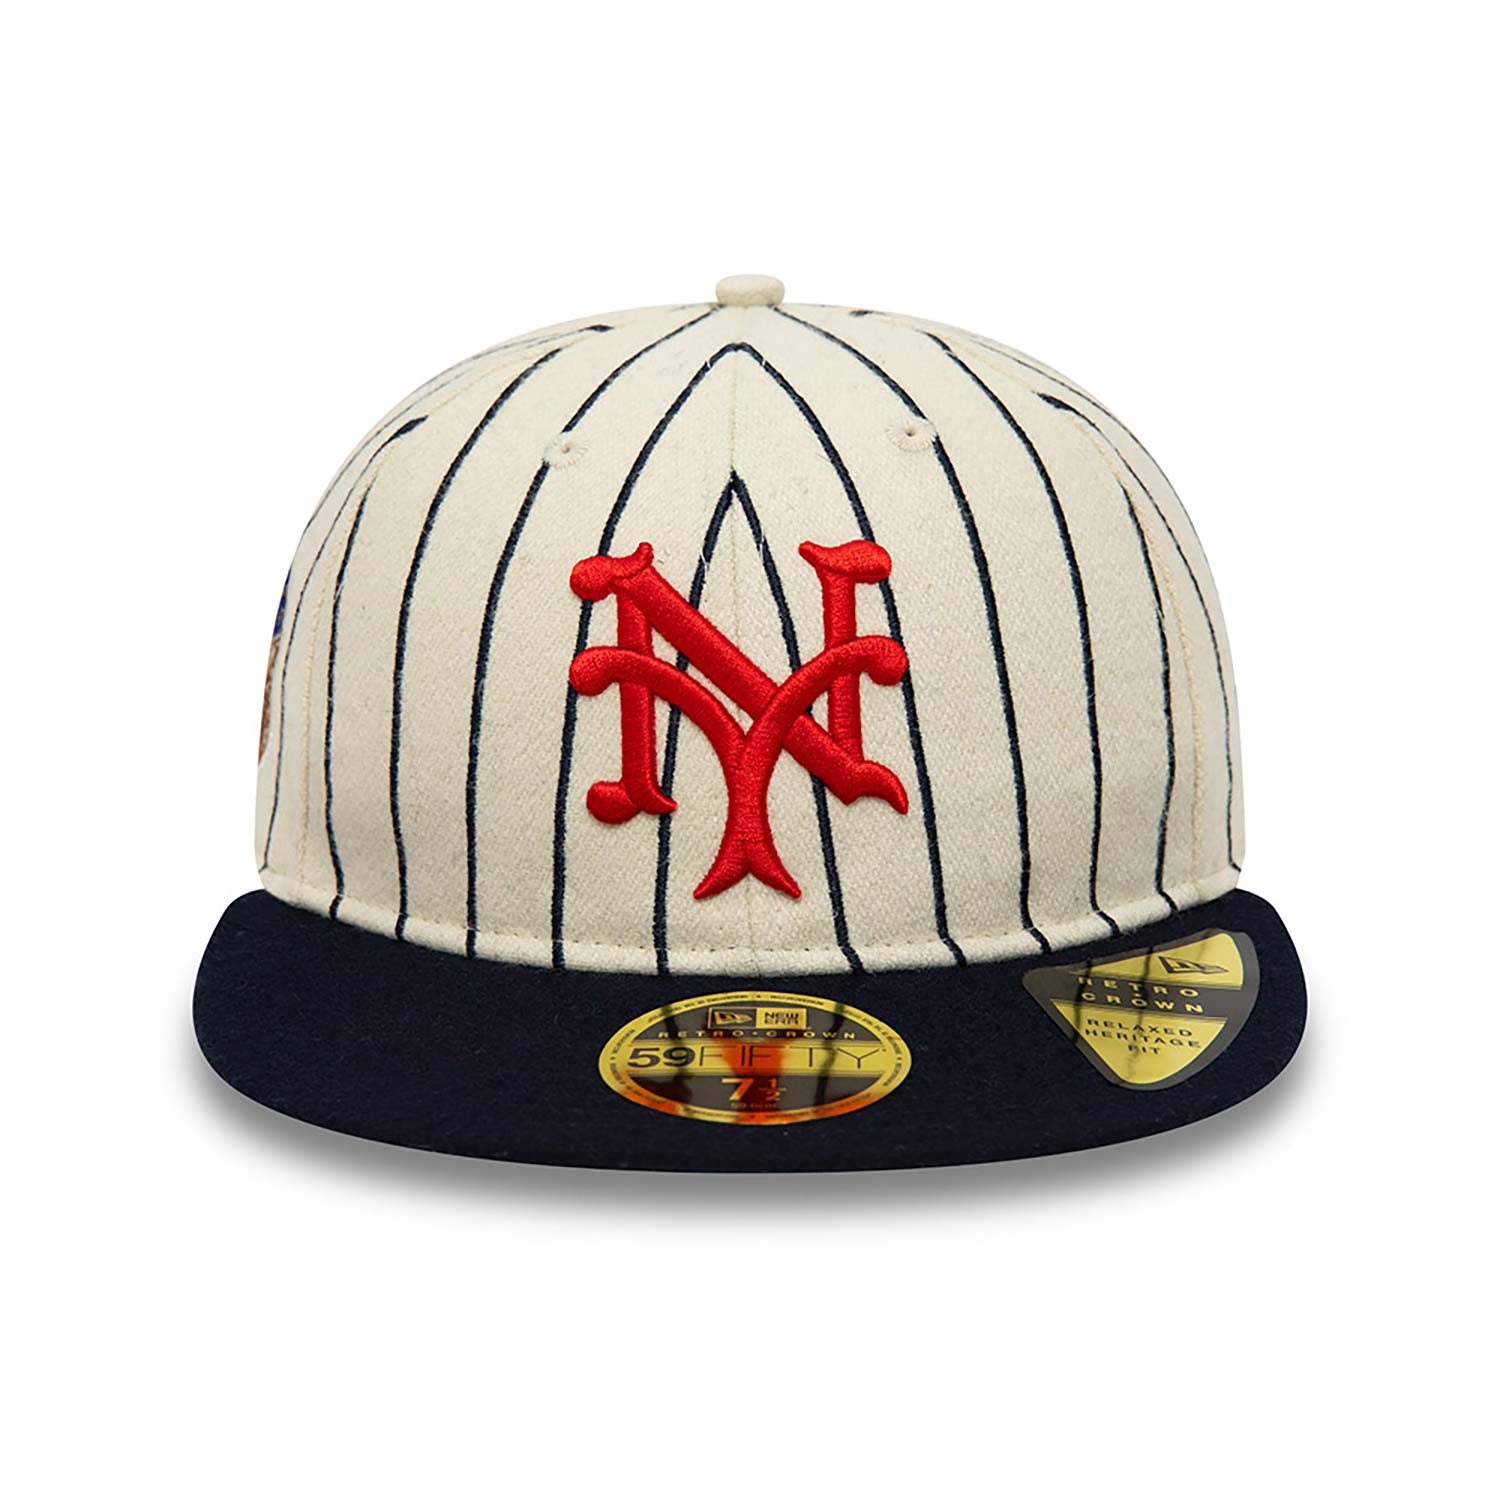 New York Mets Cooperstown White 59FIFTY Fitted Cap